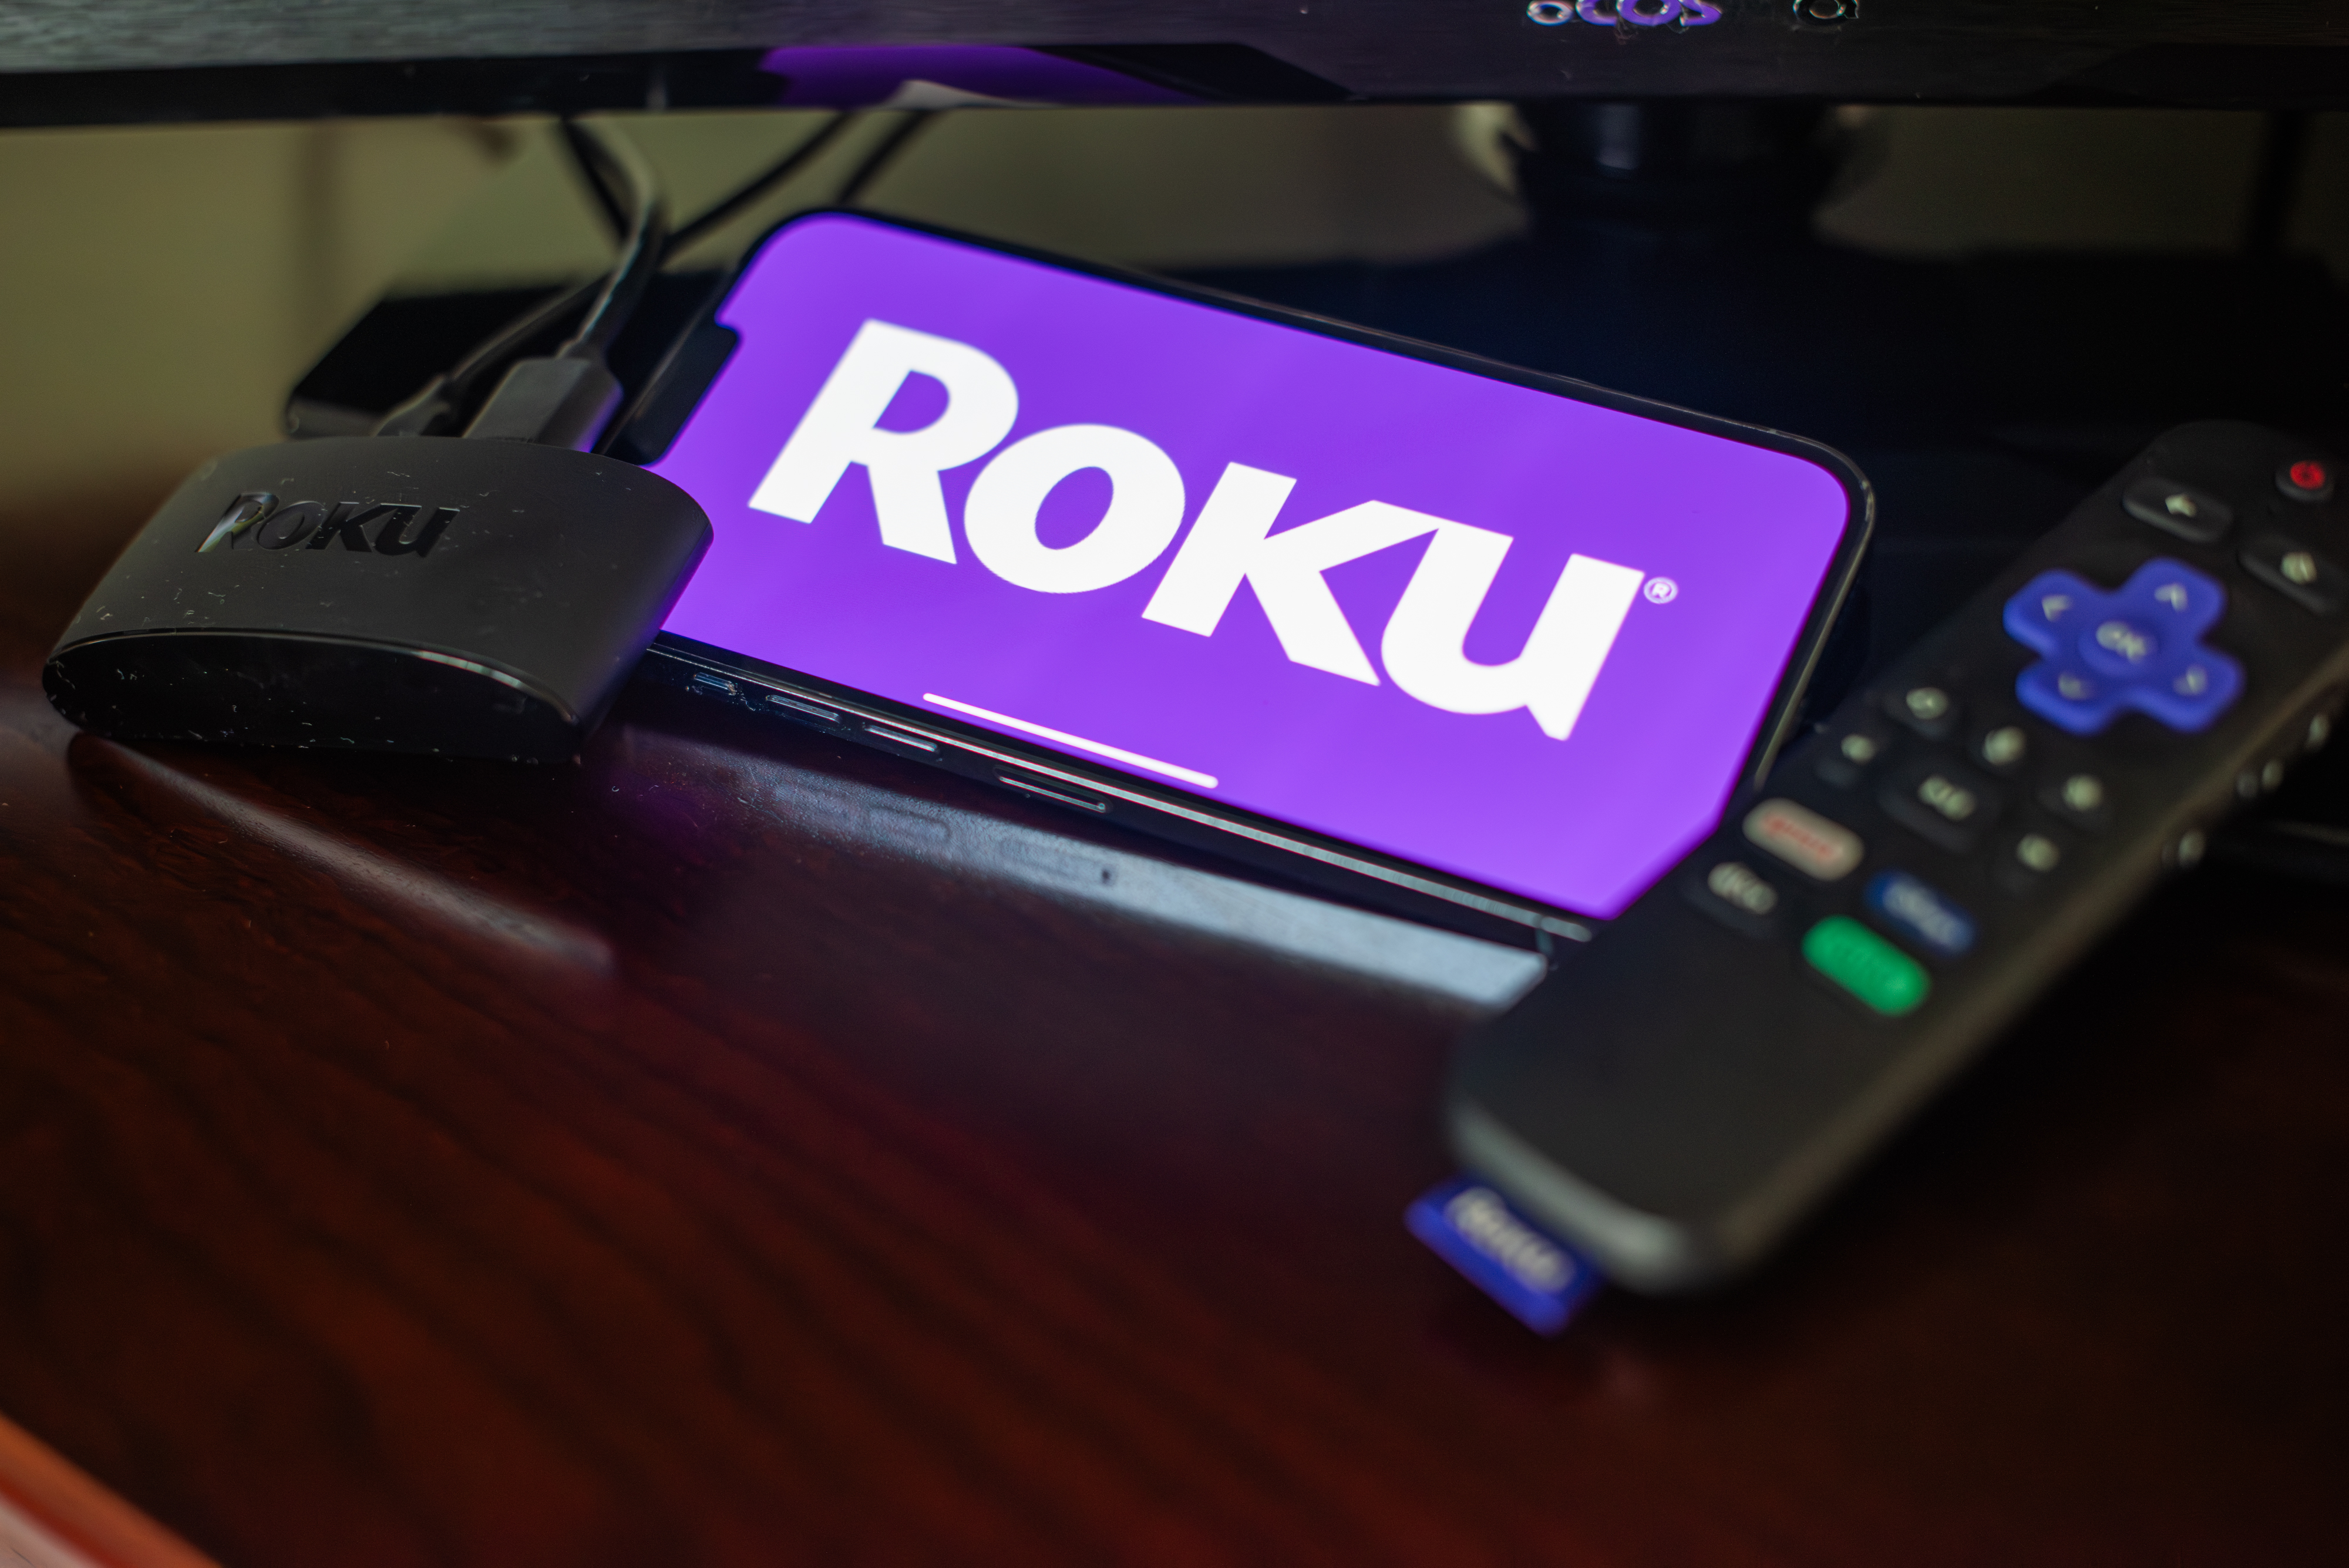 roku stock drops after earnings: an opportunity?